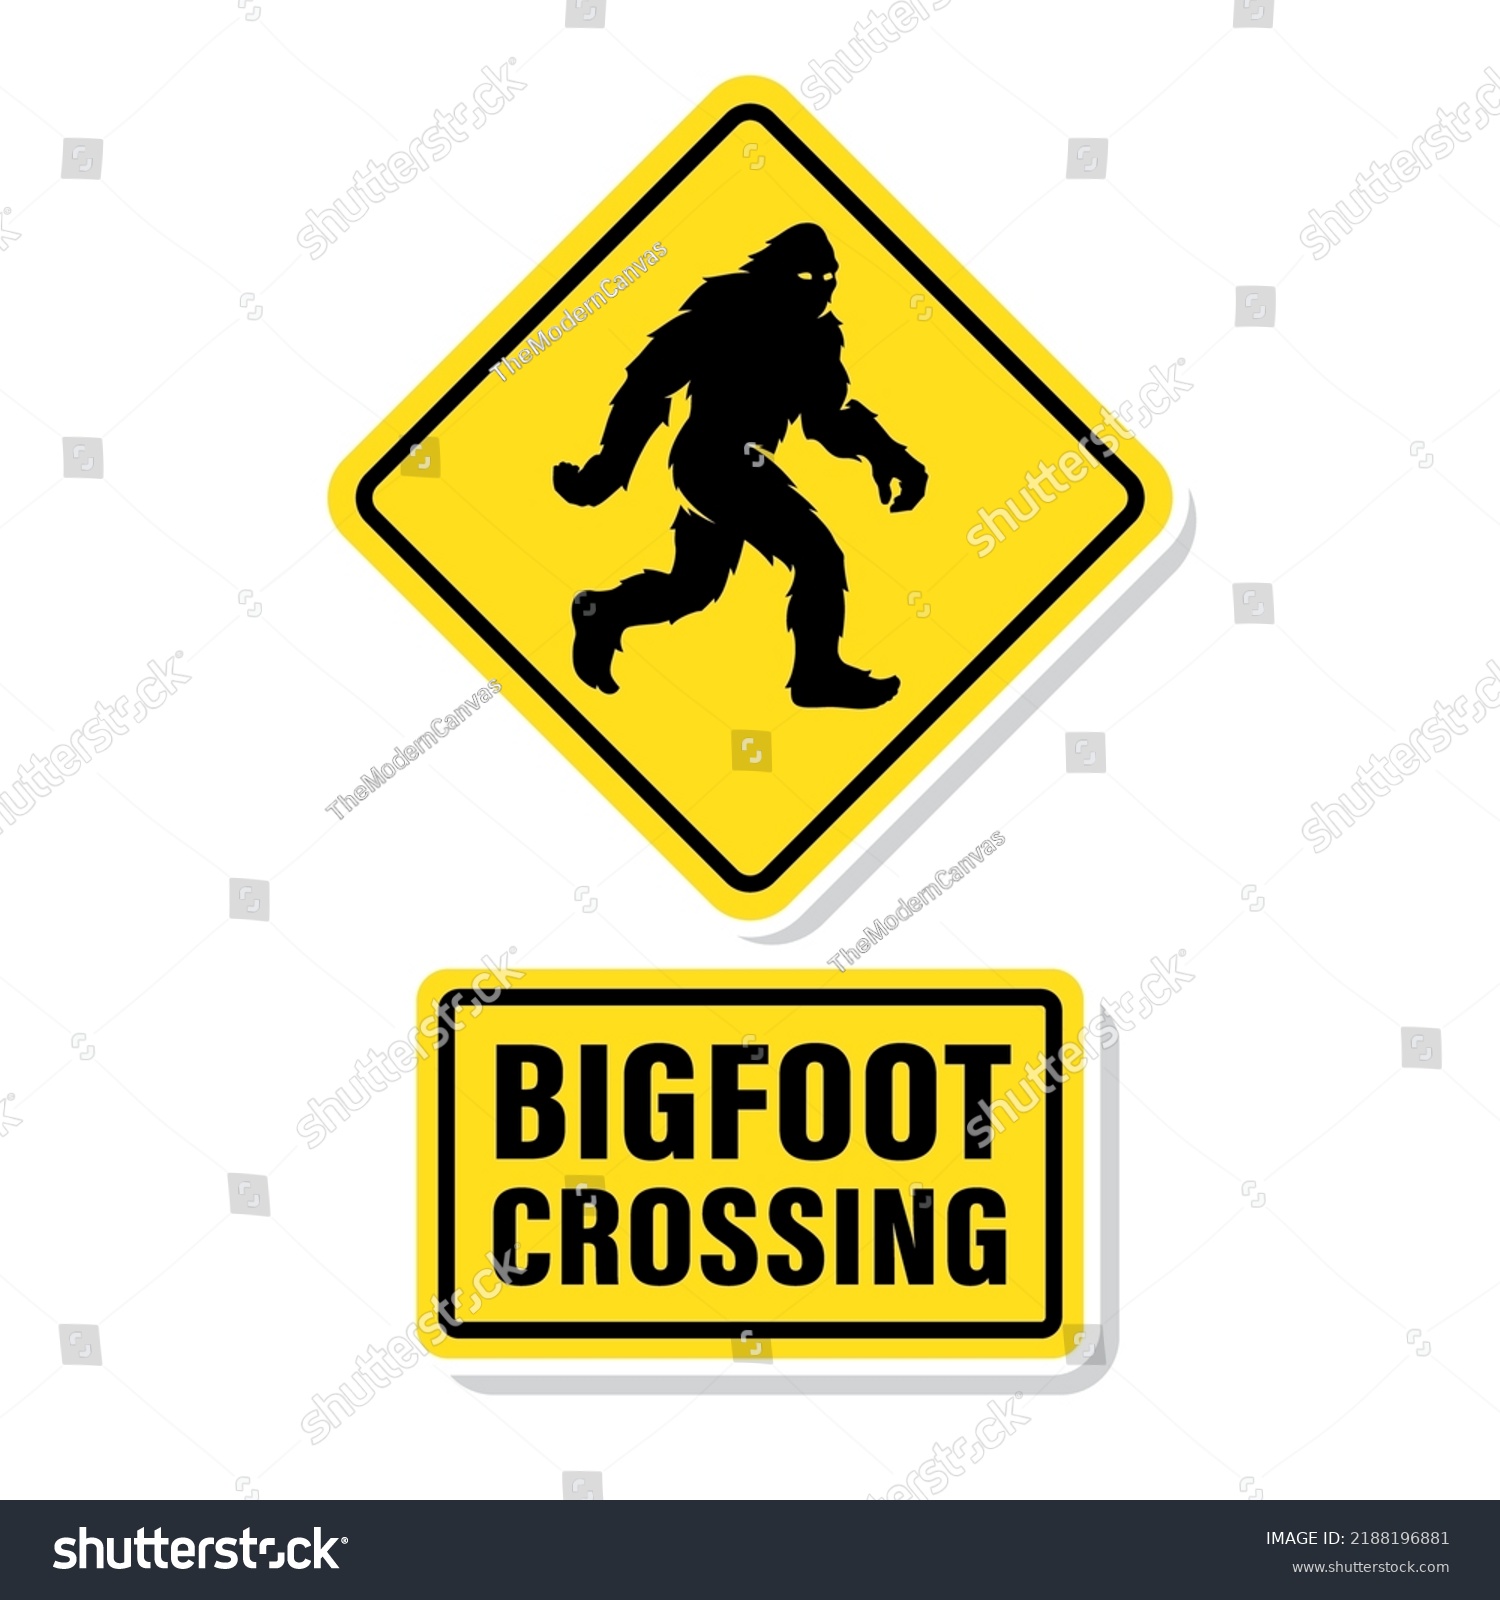 SVG of Bigfoot crossing road sign. Sasquatch walking symbol. Hairy wild man cryptid poster. Mythical cryptozoology creature silhouette icon. Vector illustration. svg